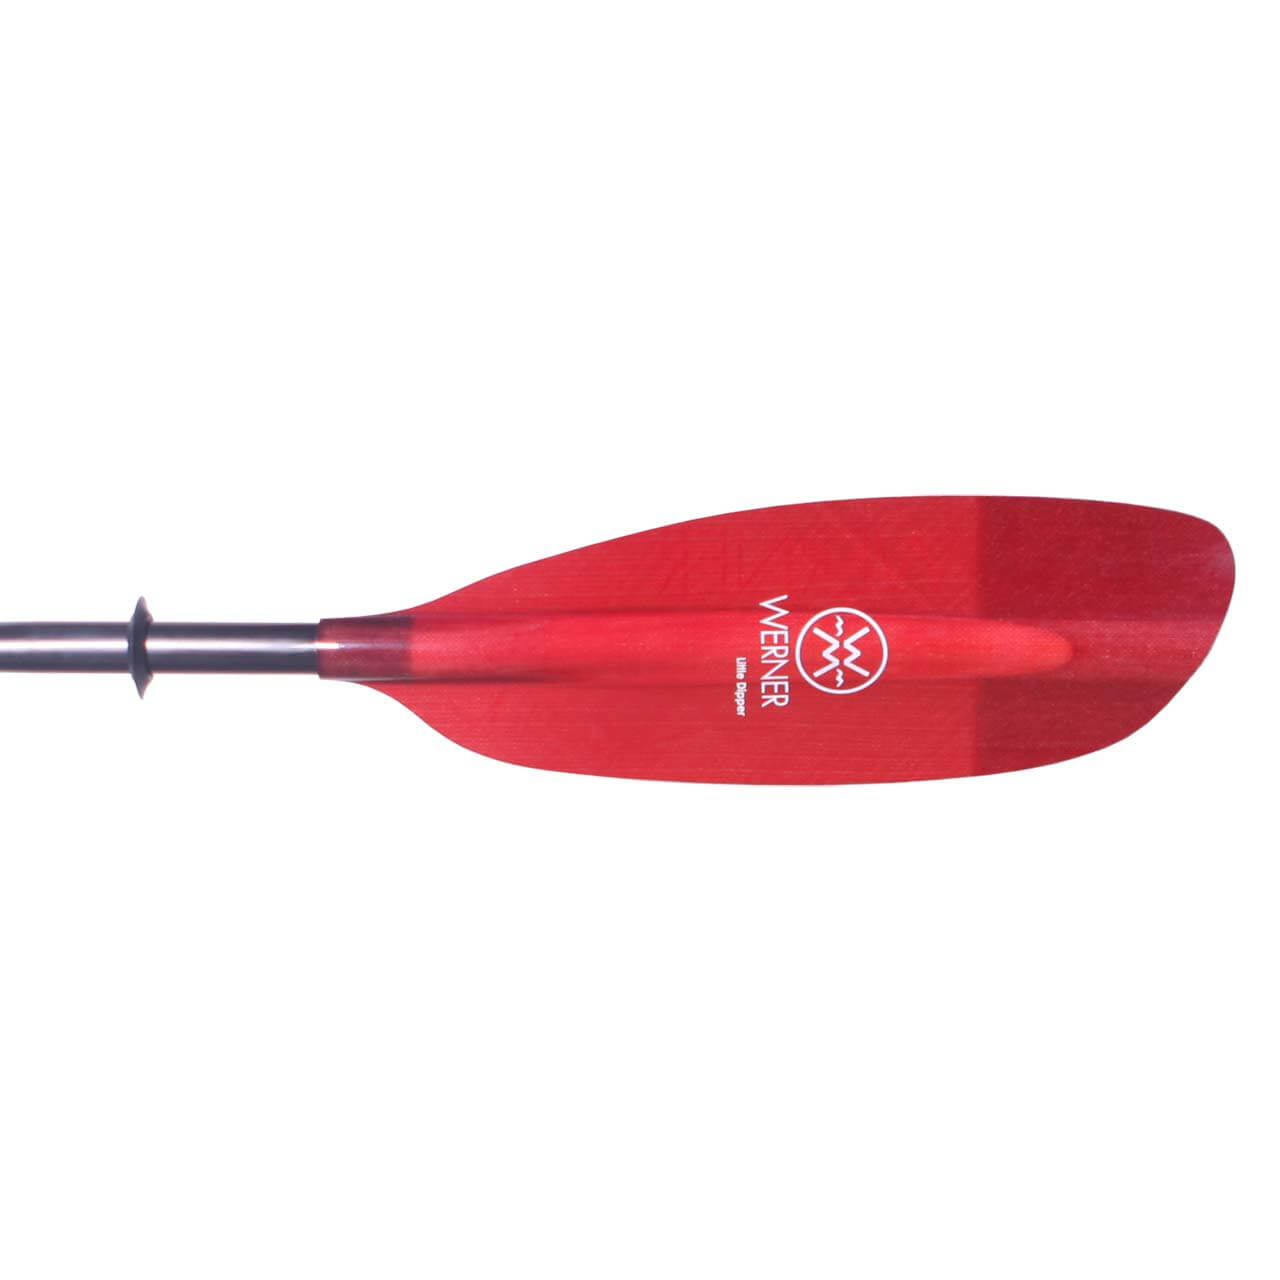 Werner Little Dipper - Red, 220cm (Small Straight)